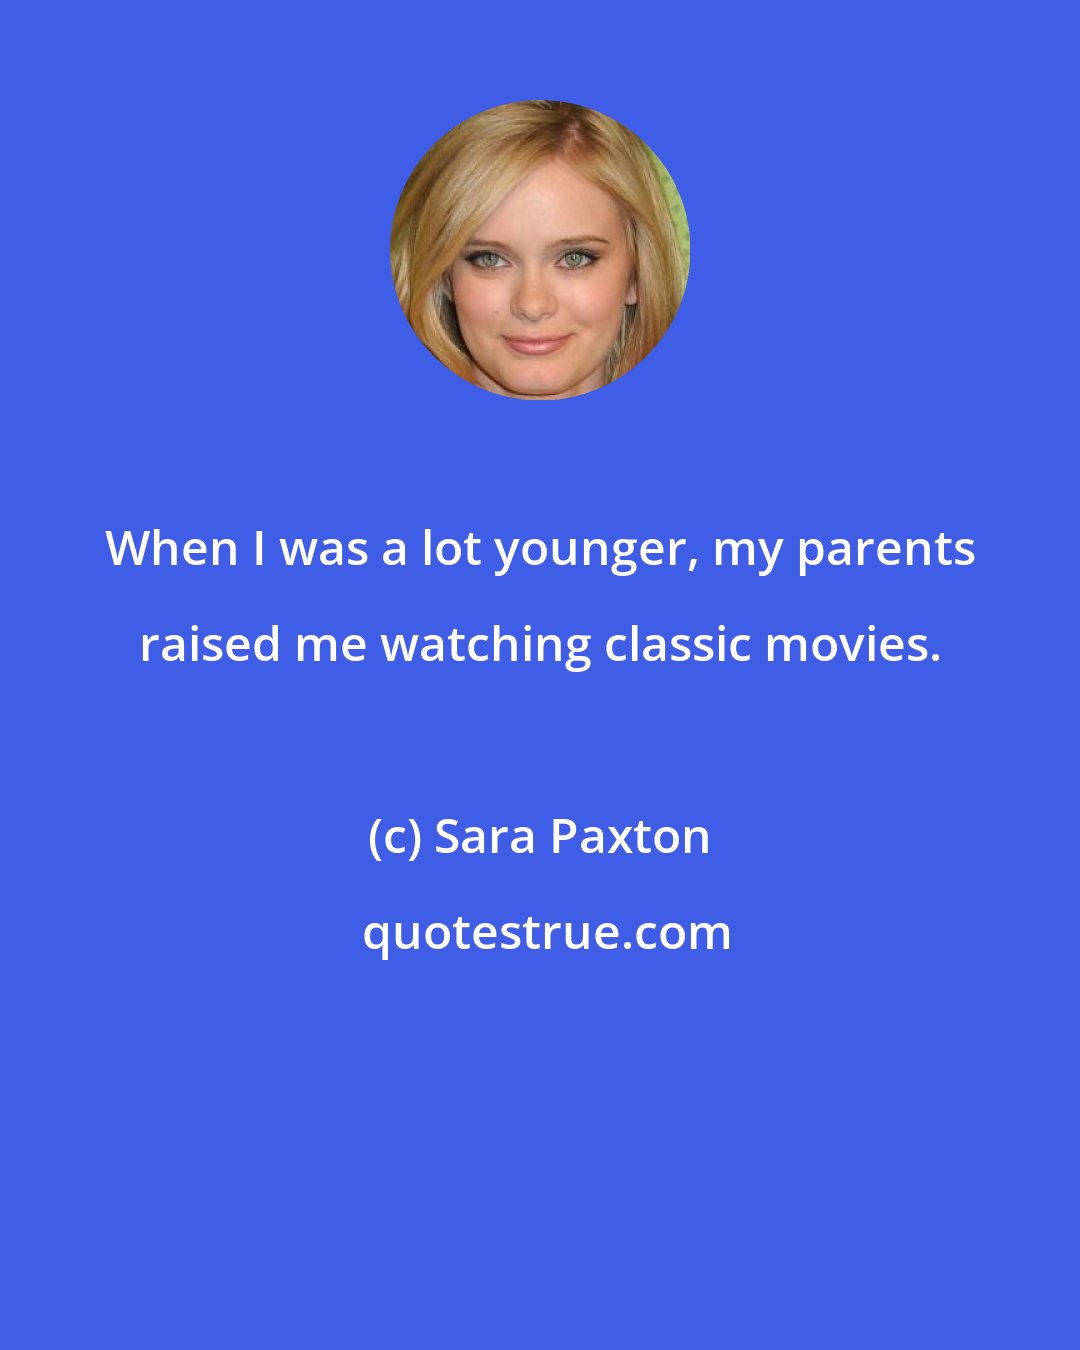 Sara Paxton: When I was a lot younger, my parents raised me watching classic movies.